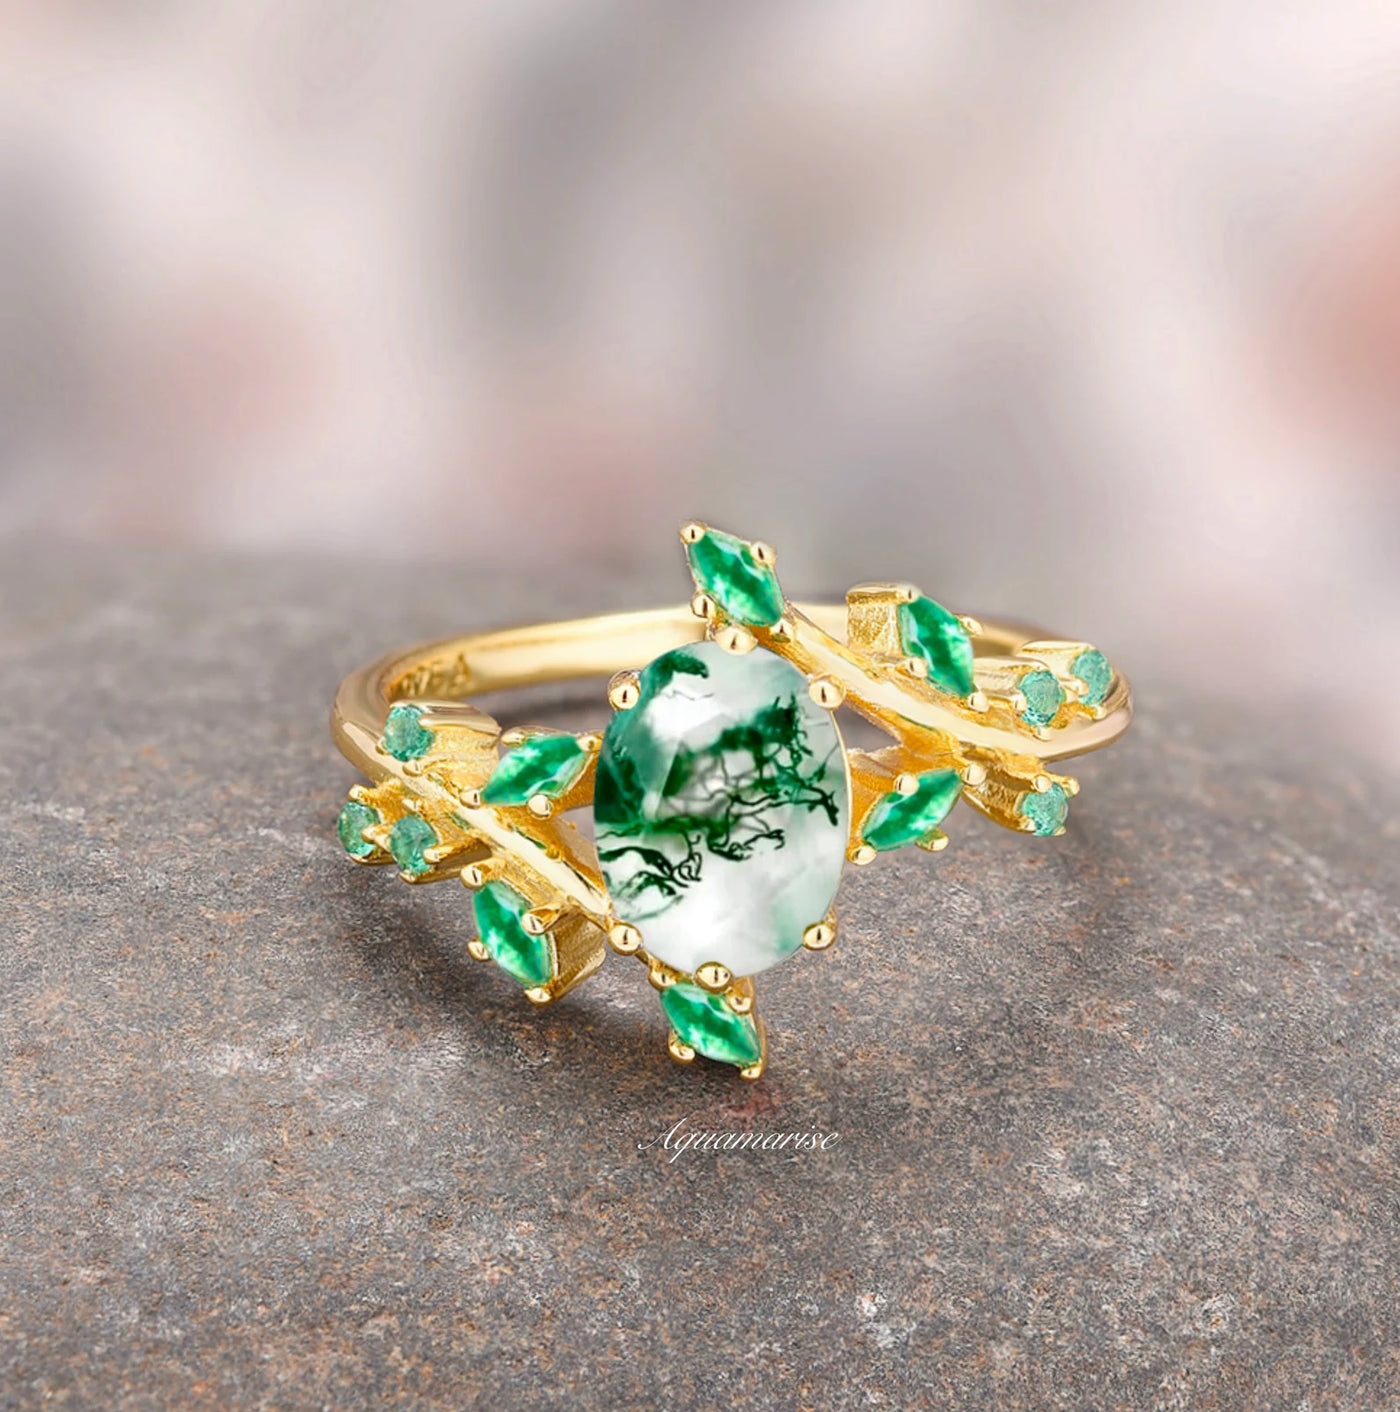 Green Moss Agate & Fire Opal Gold Leaf Couples Ring Set- His and Hers Wedding Band